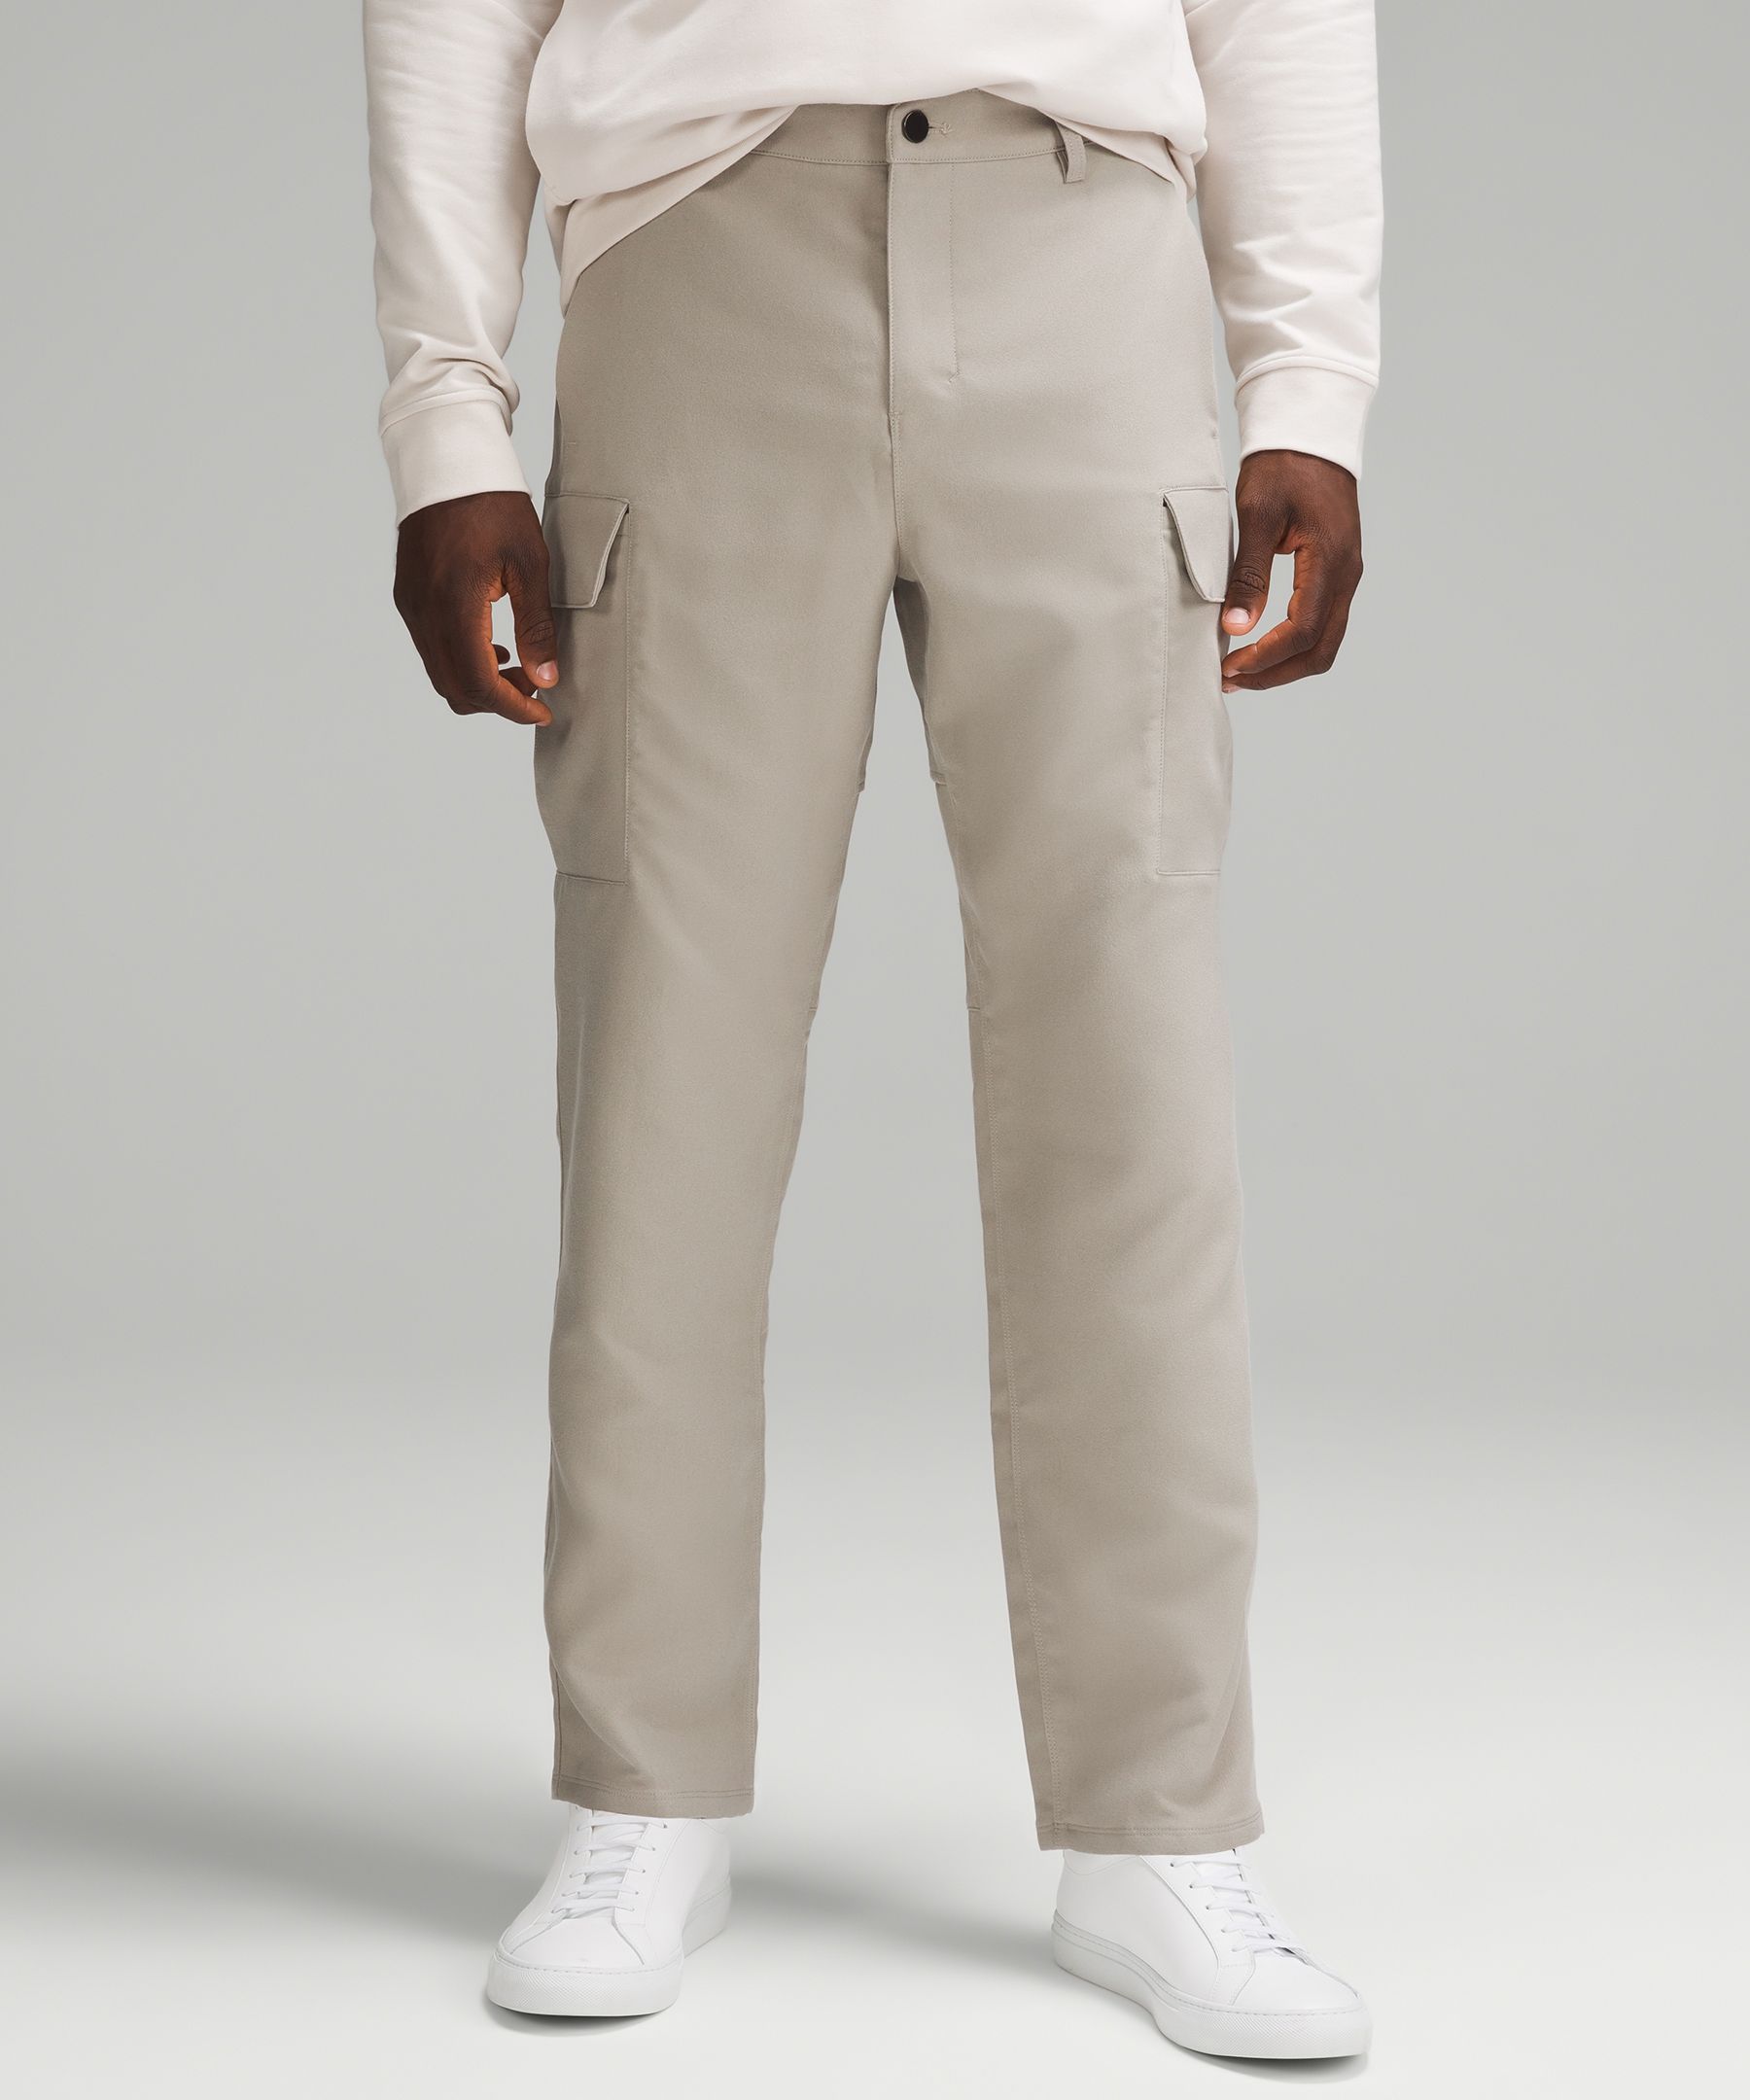 Classic-Fit Sueded Cargo Pant, Men's Trousers